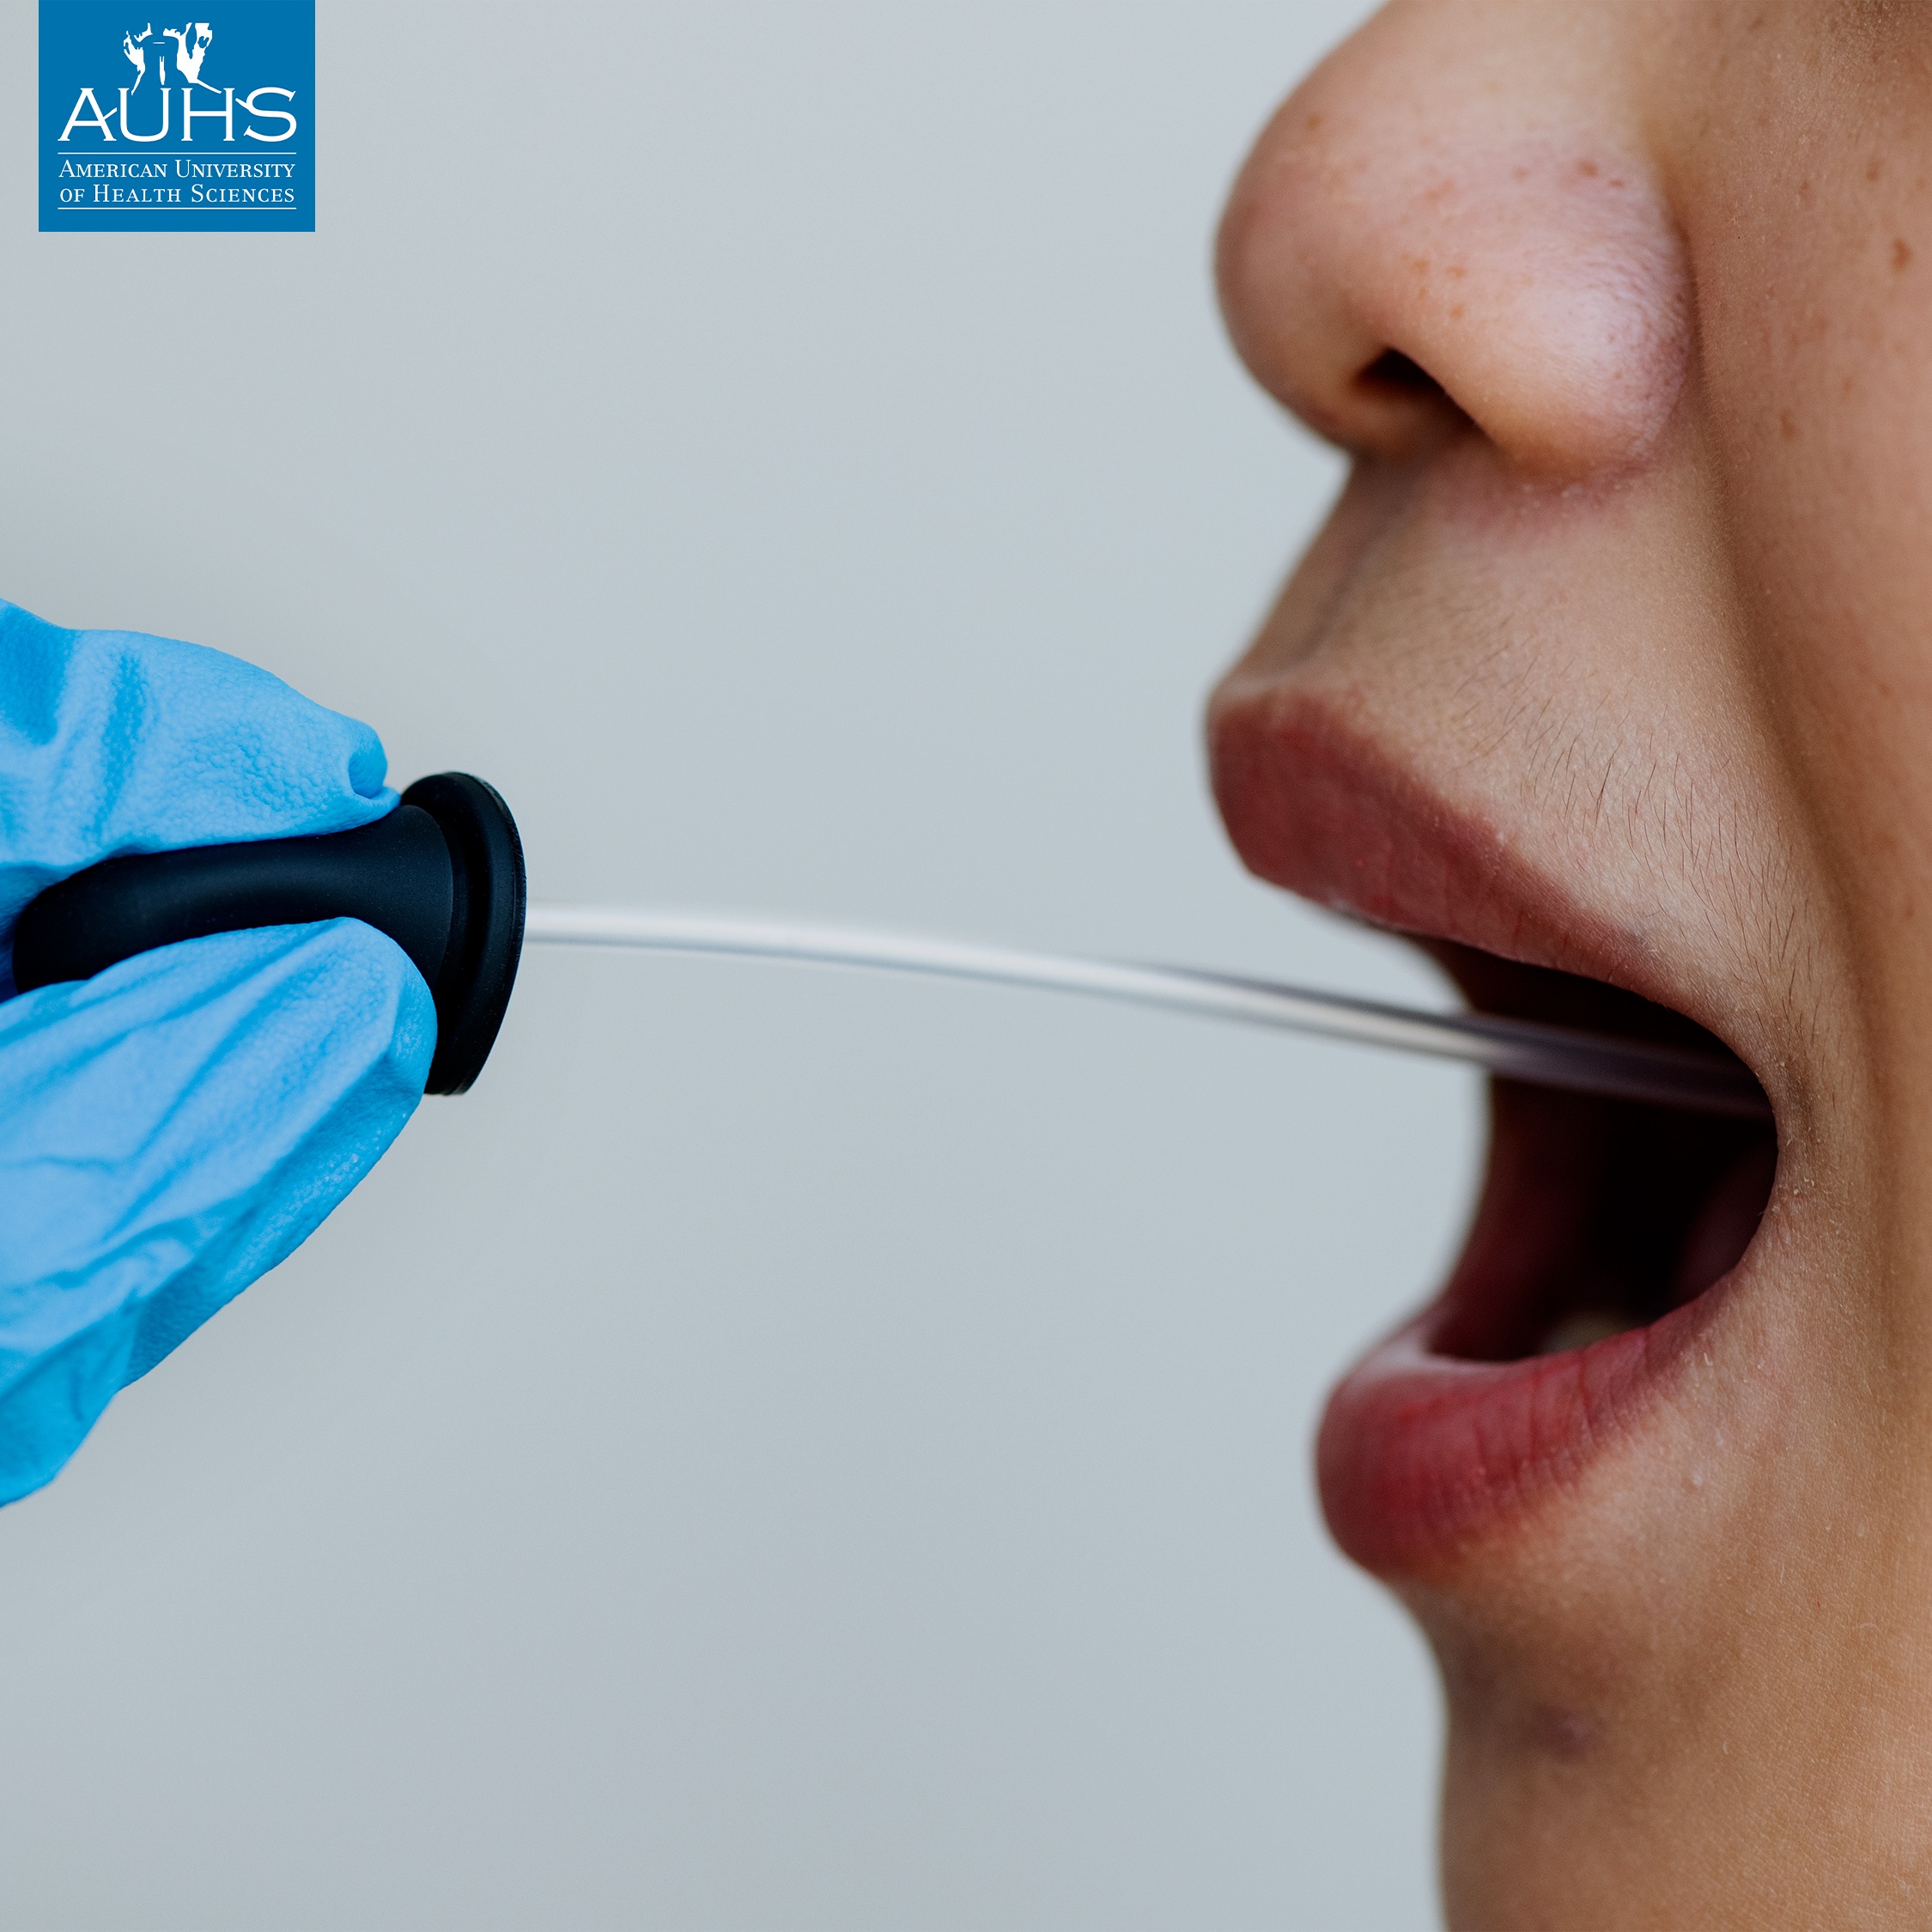 Saliva could help detecting health-related physiologic changes